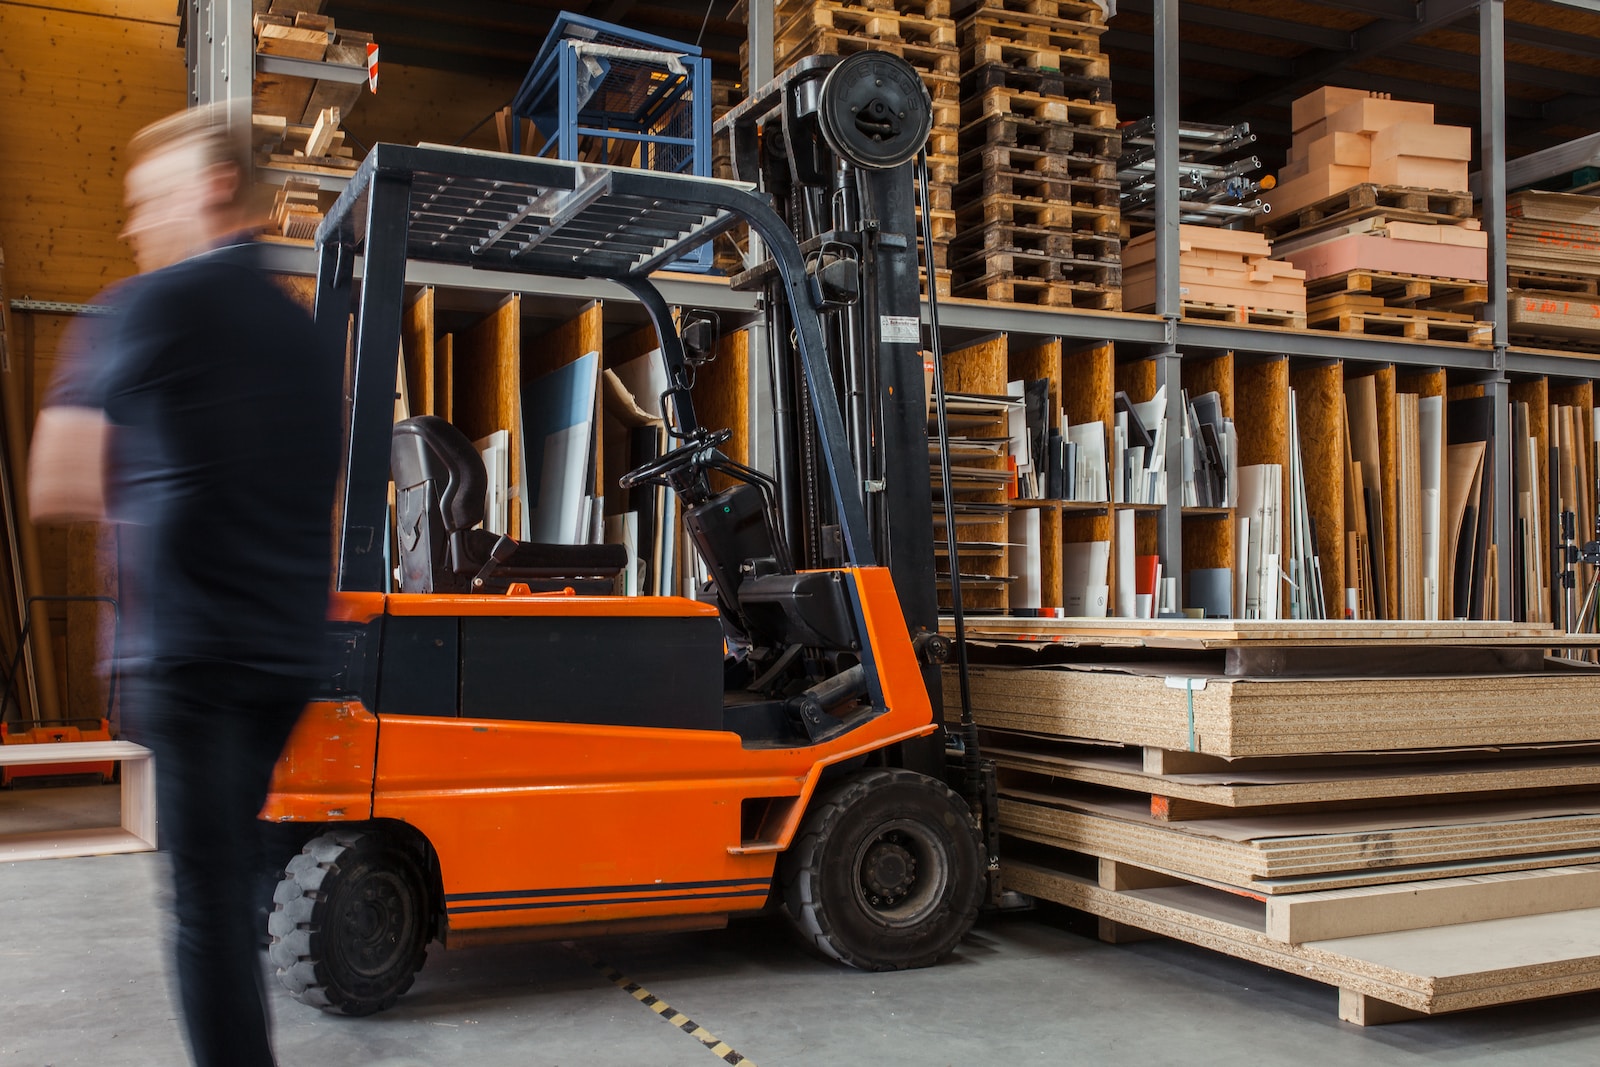 Inventory Management: A Key to Streamlining Business Operations